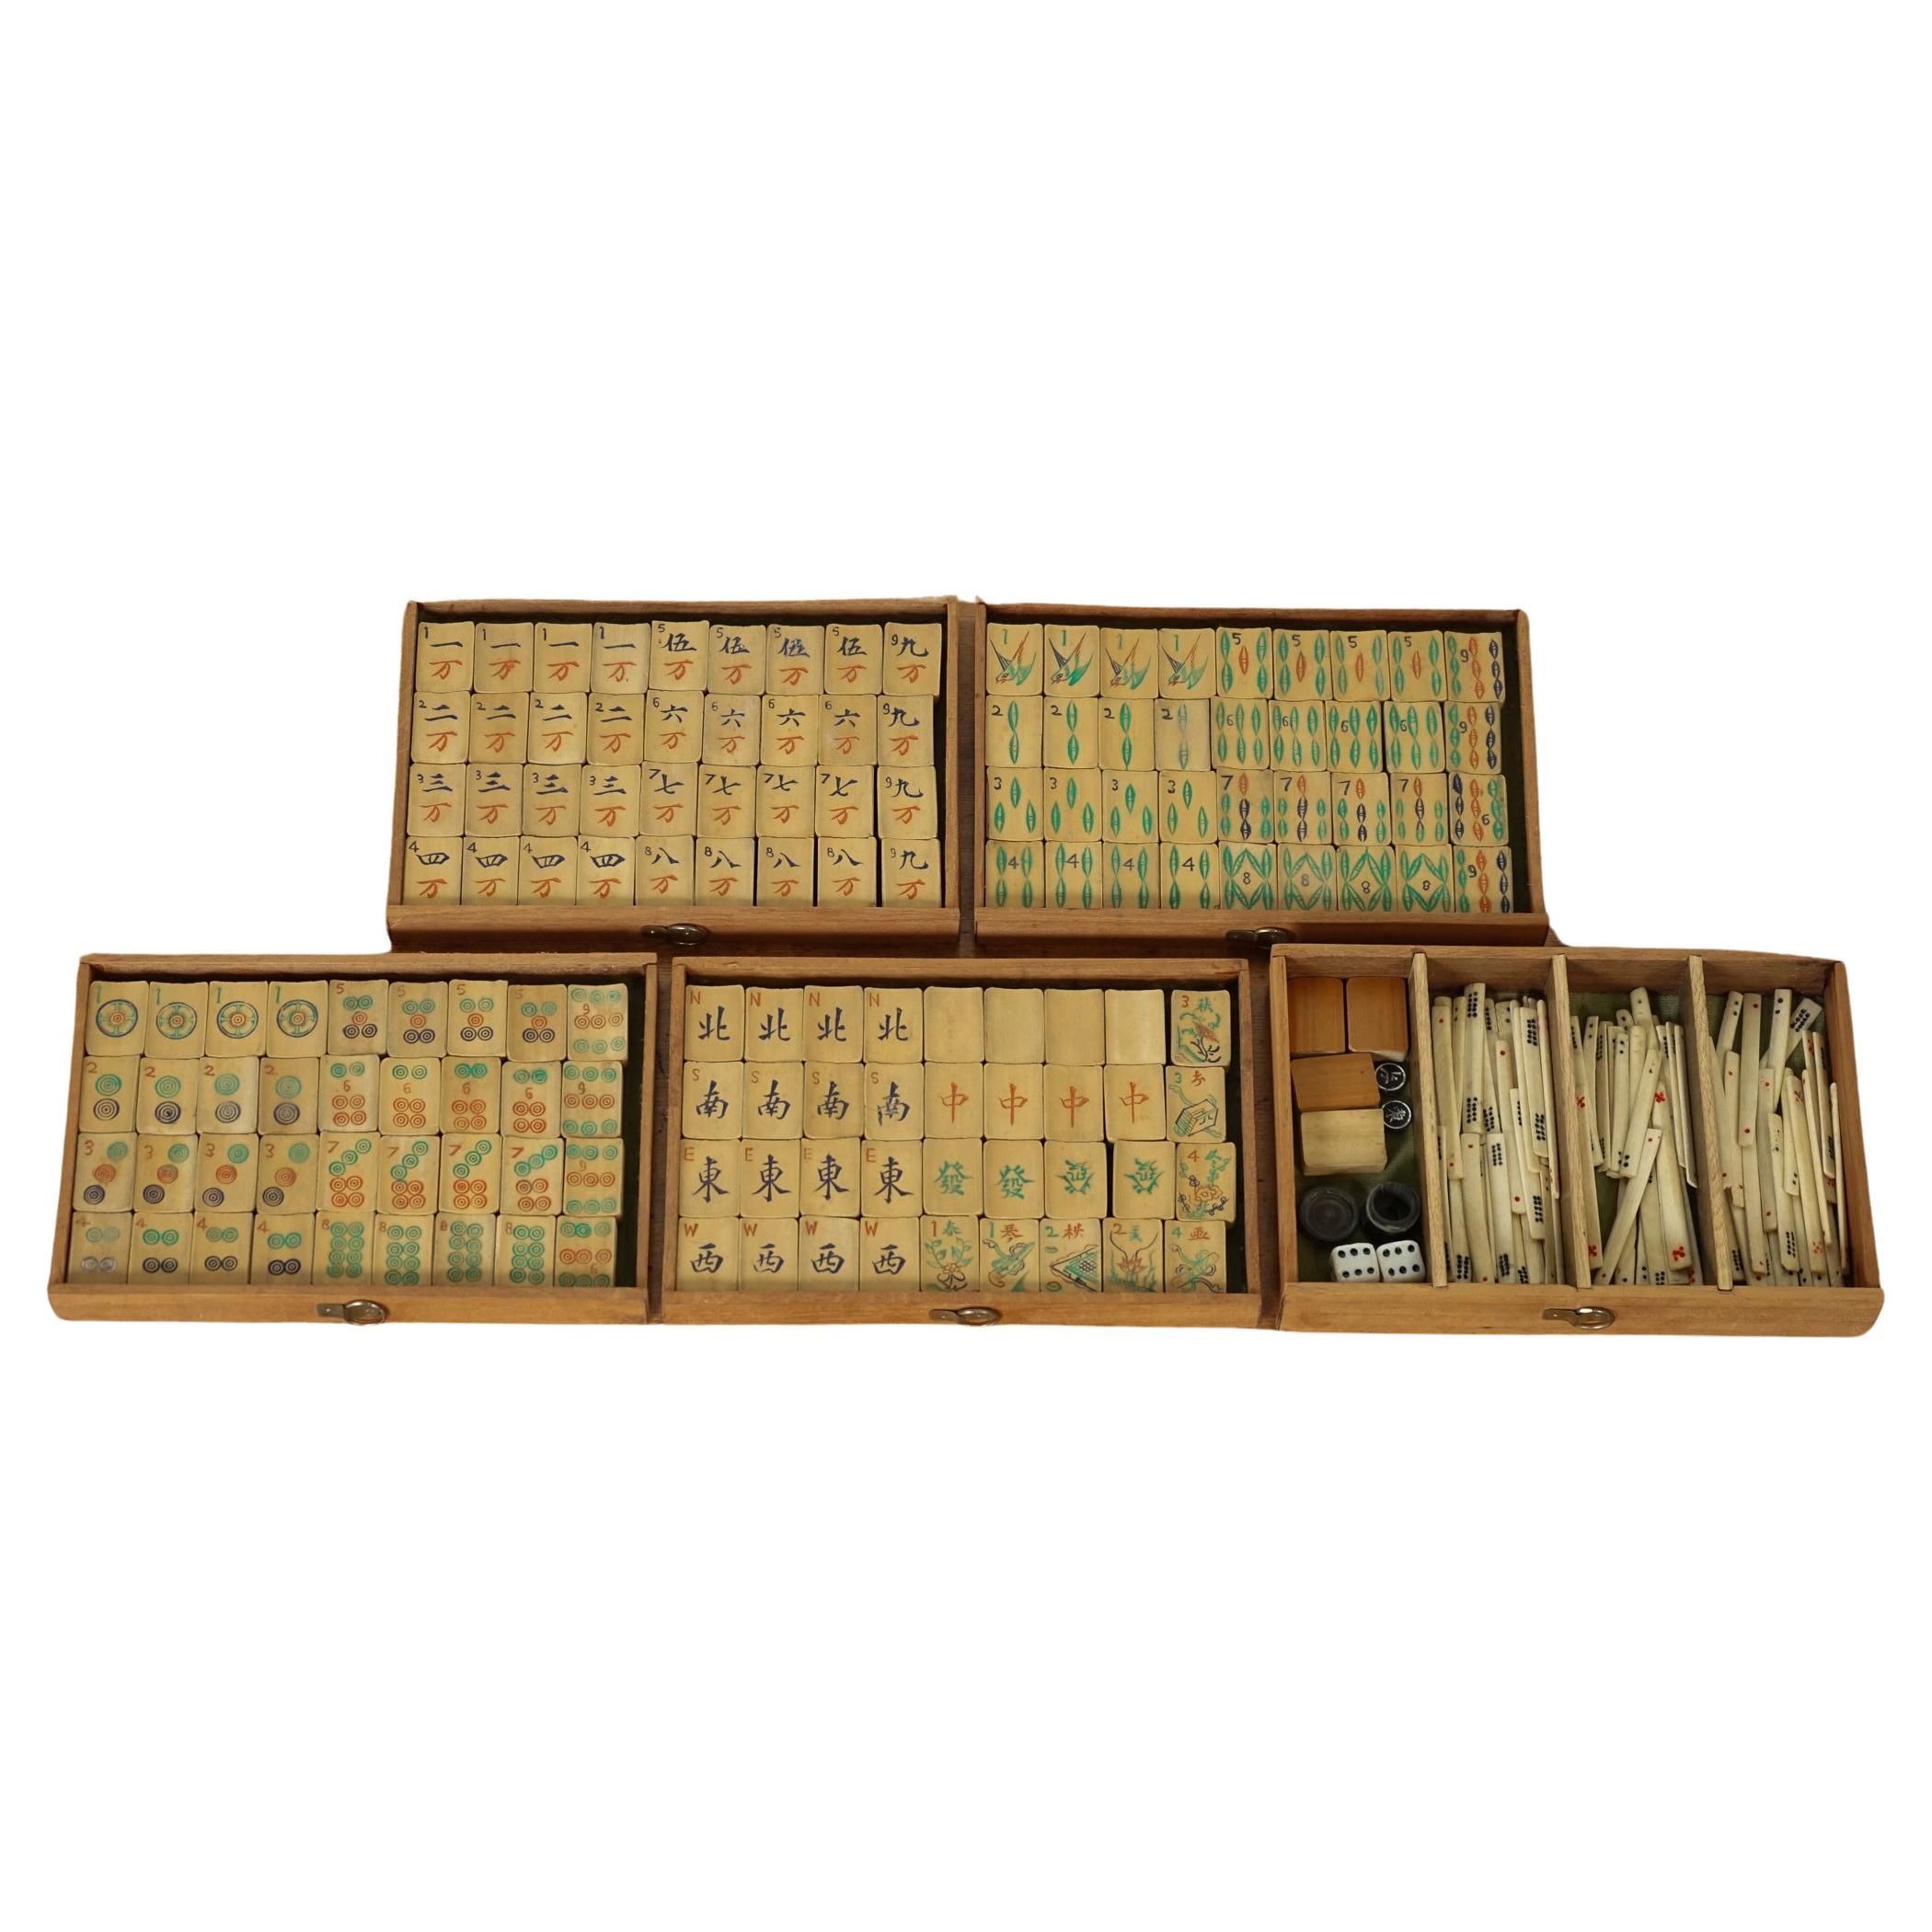 
We are delighted to offer for sale this exquisite Antique Chinese Mah-jong set, dating back to circa 1920s, is now available for purchase. It is a complete set, including the original counters, and comes in a case with a rare and stunning Art